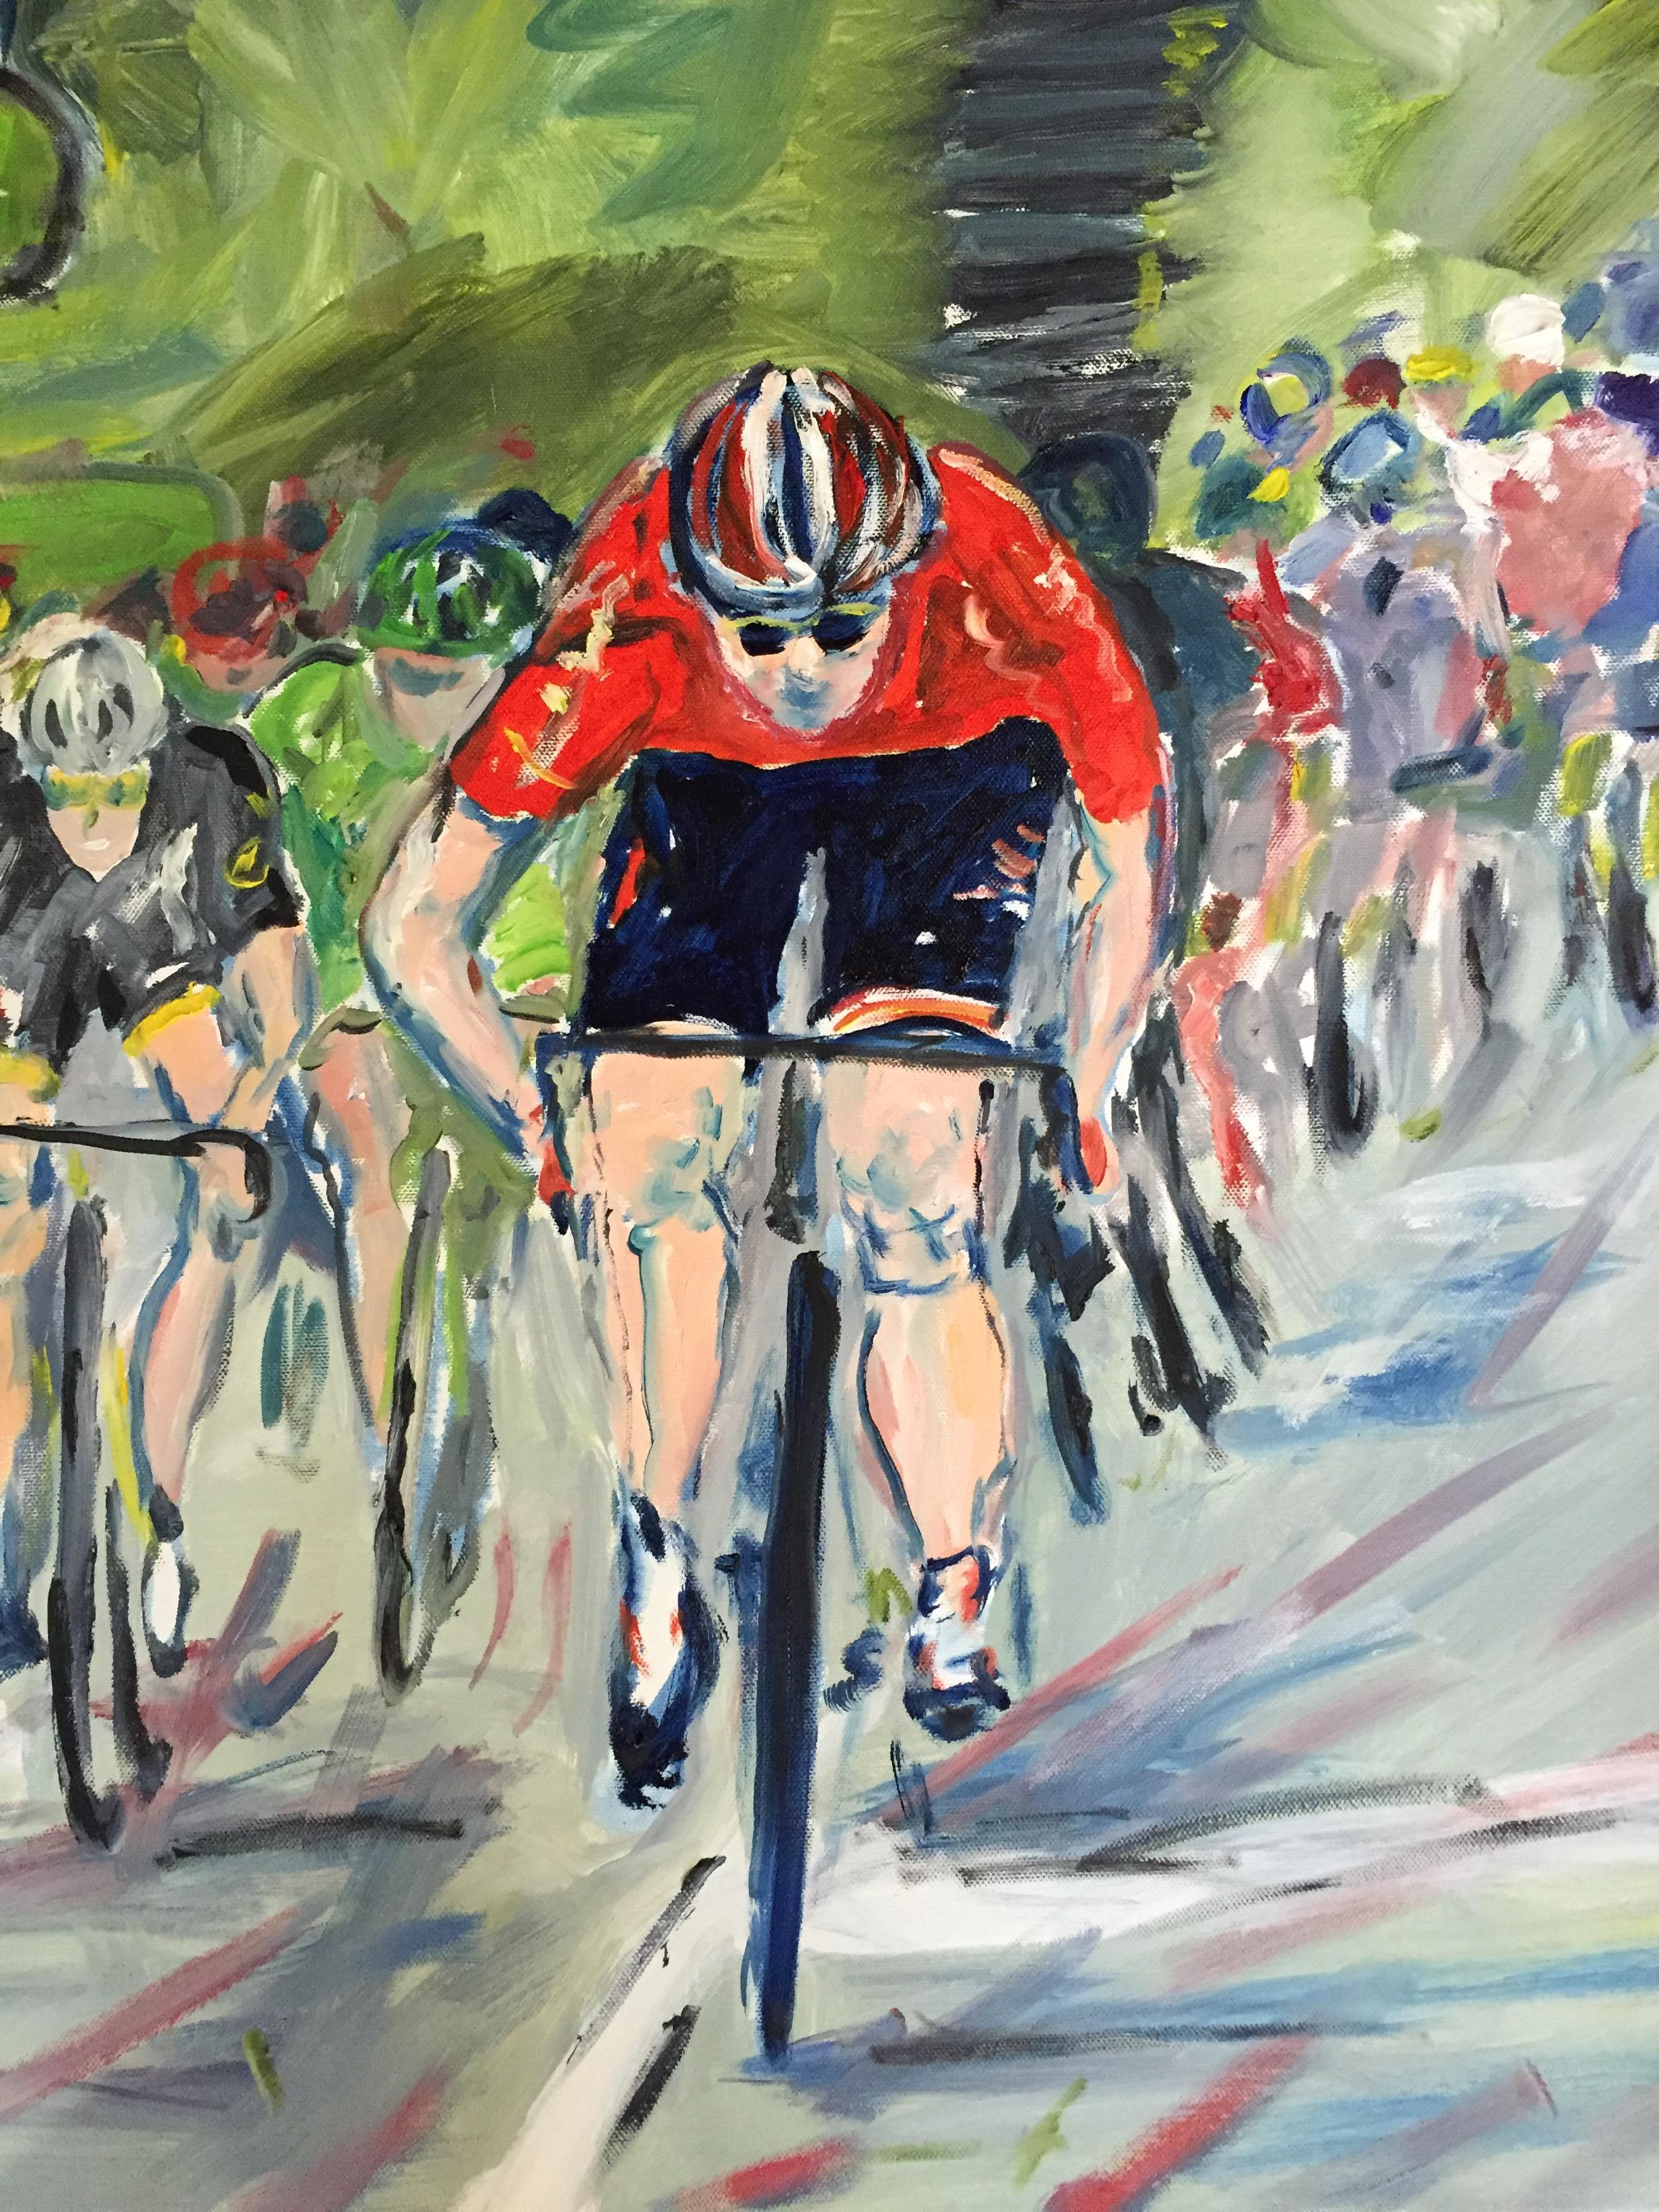 The Final Sprint - Tour de France Stage 15 2015, bicycle art, affordable art - Gray Abstract Painting by Gareth Bayley